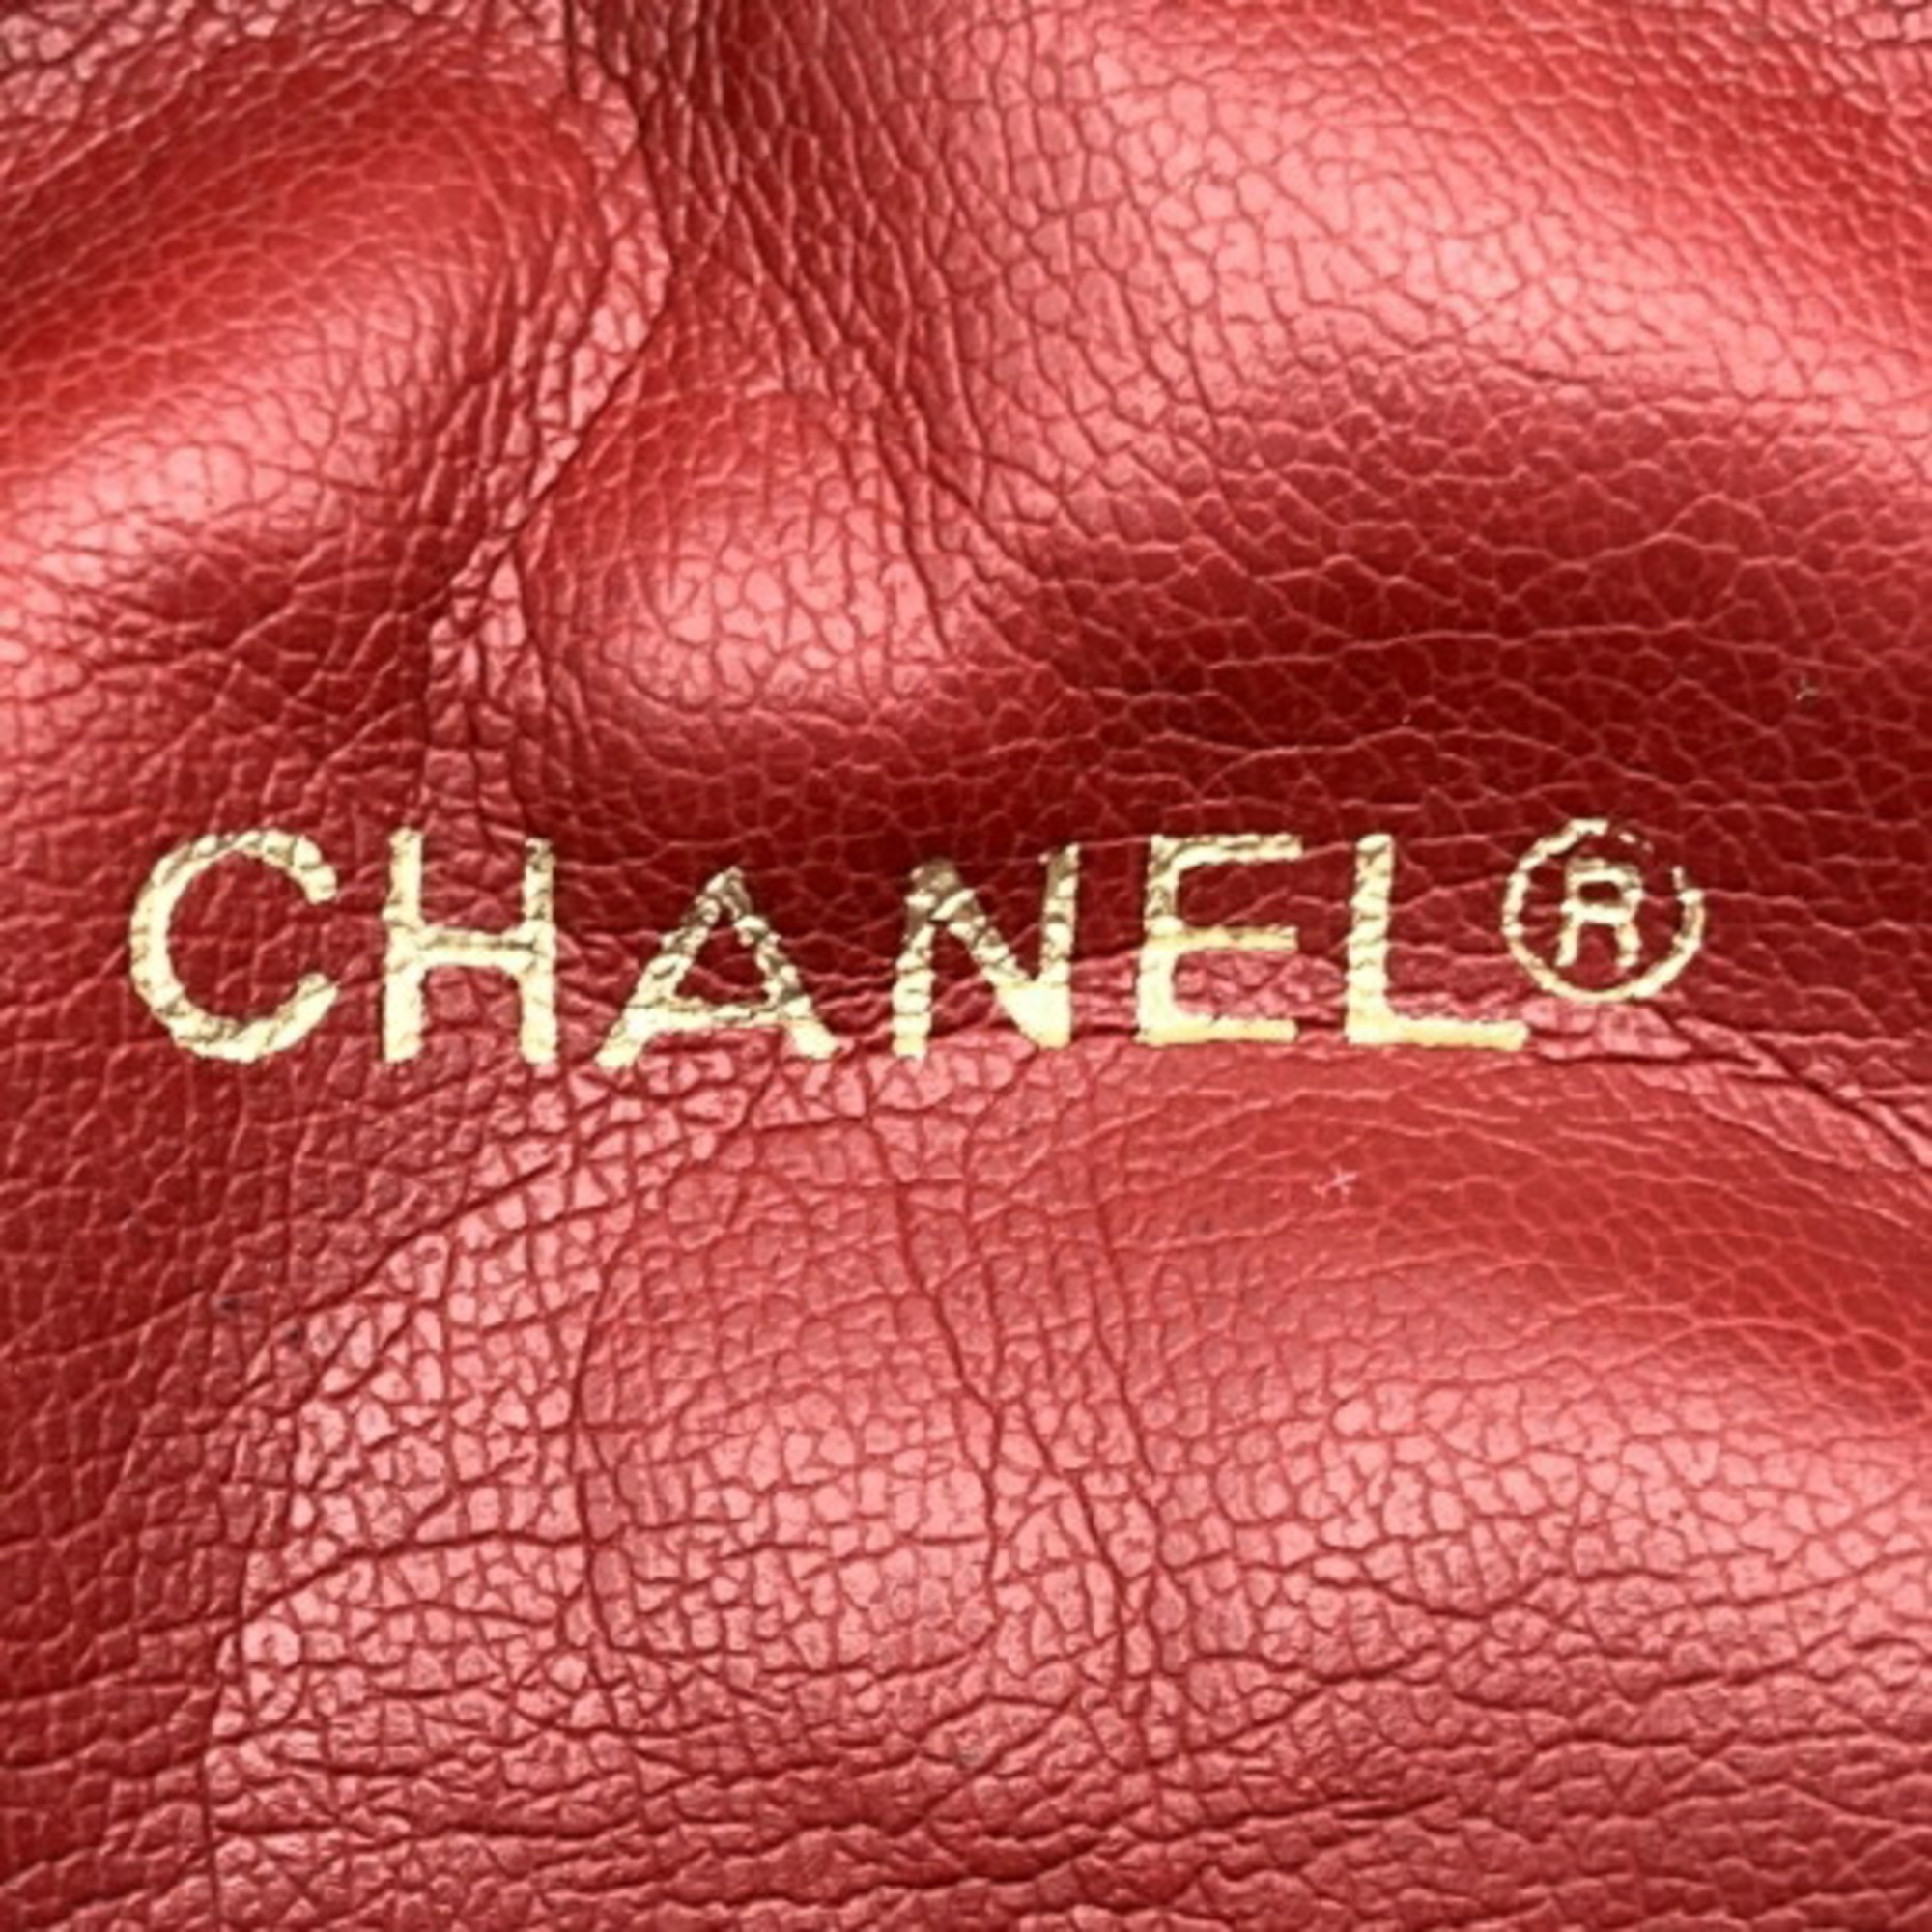 CHANEL Bicolore Shoulder Bag Chain Red Bordeaux Coco Mark Leather Women's IT4CIX2F0QIY